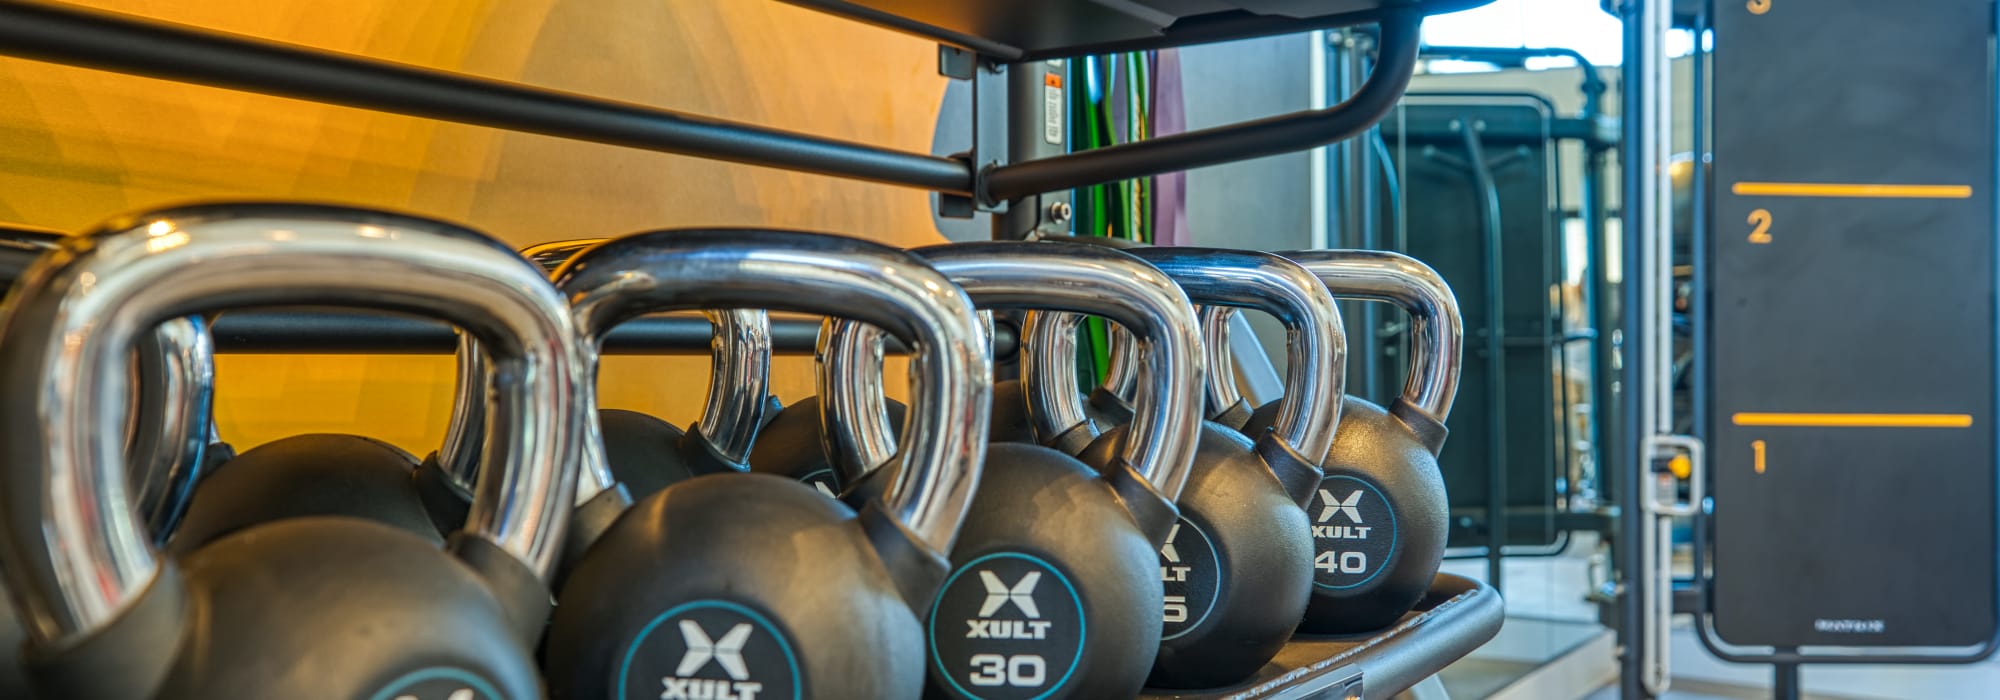 Fitness Center weights at Alexan Tempe in Tempe, Arizona